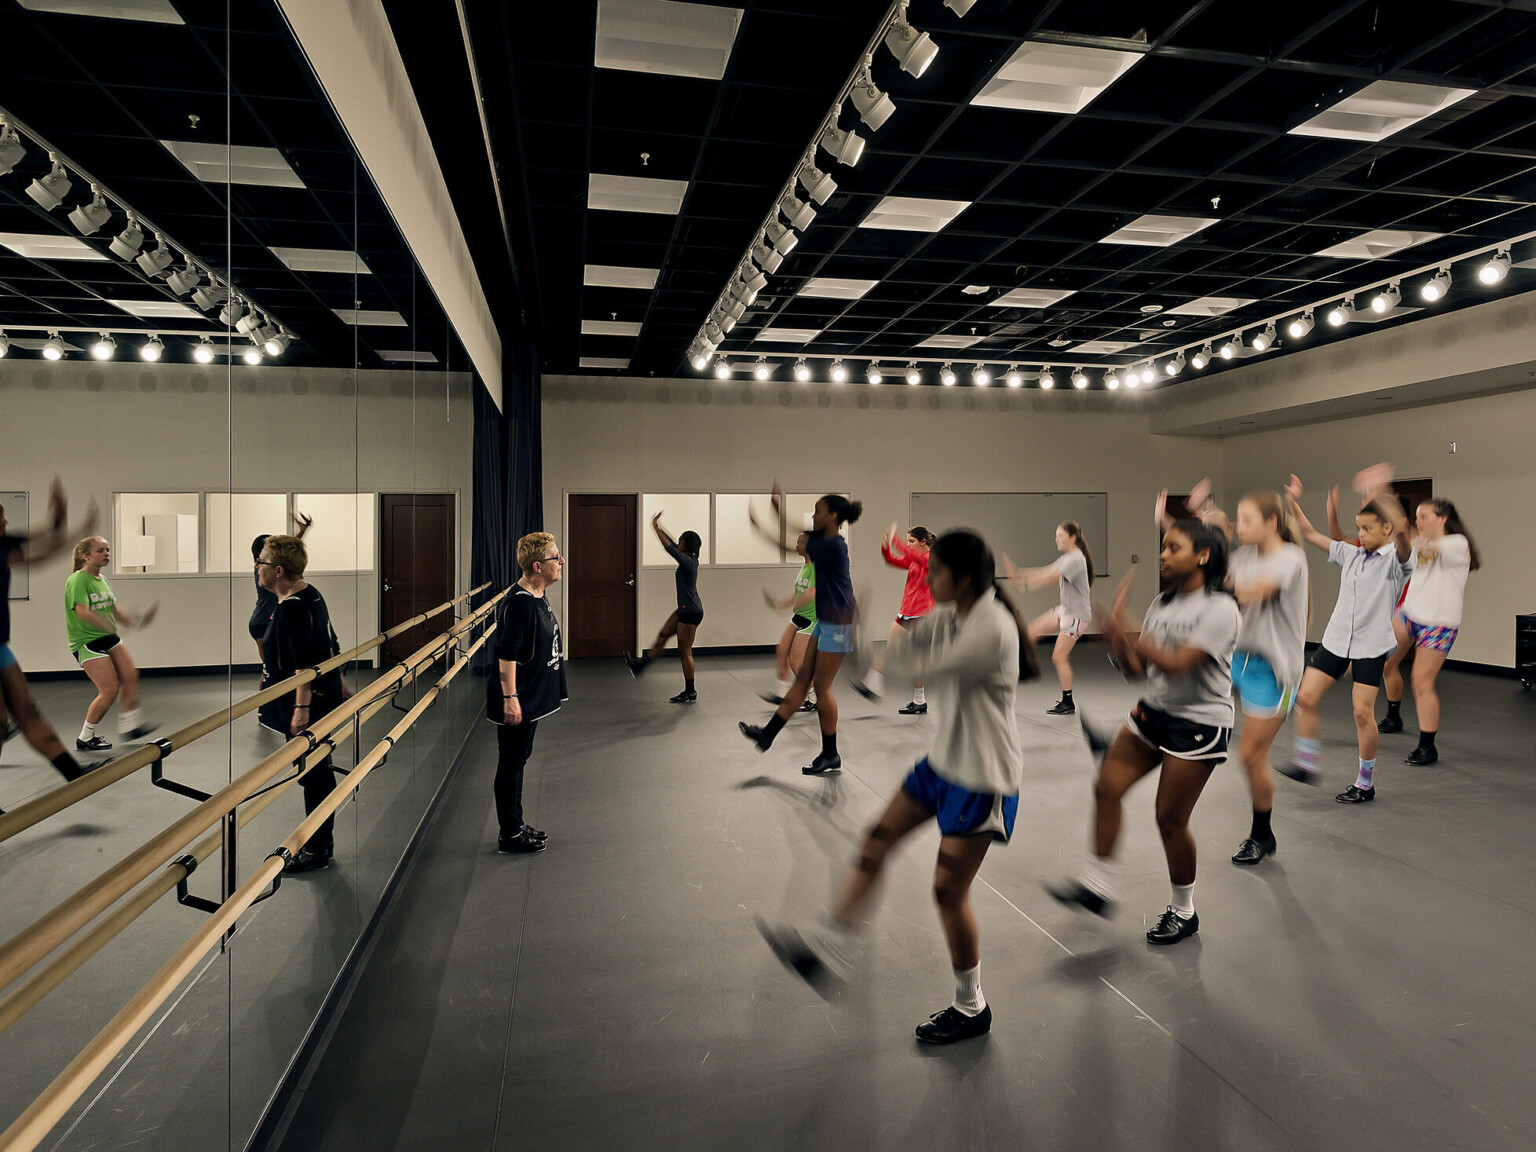 students learn dance moves in front of full-length mirrors, with balance bar, custom overhead lighting and flooring